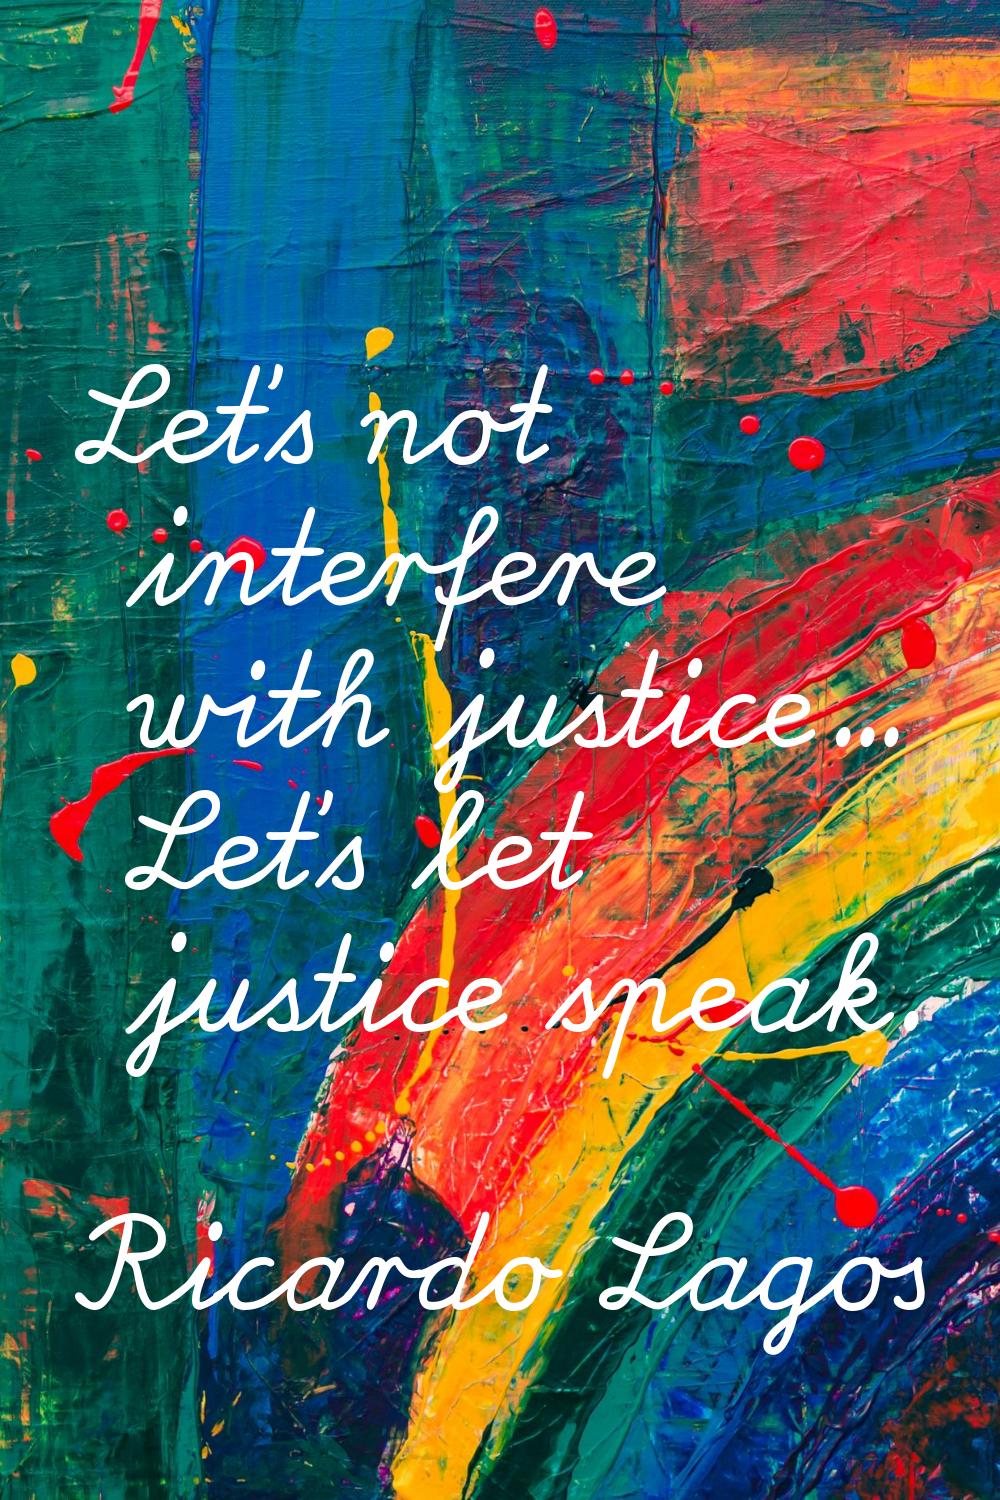 Let's not interfere with justice... Let's let justice speak.